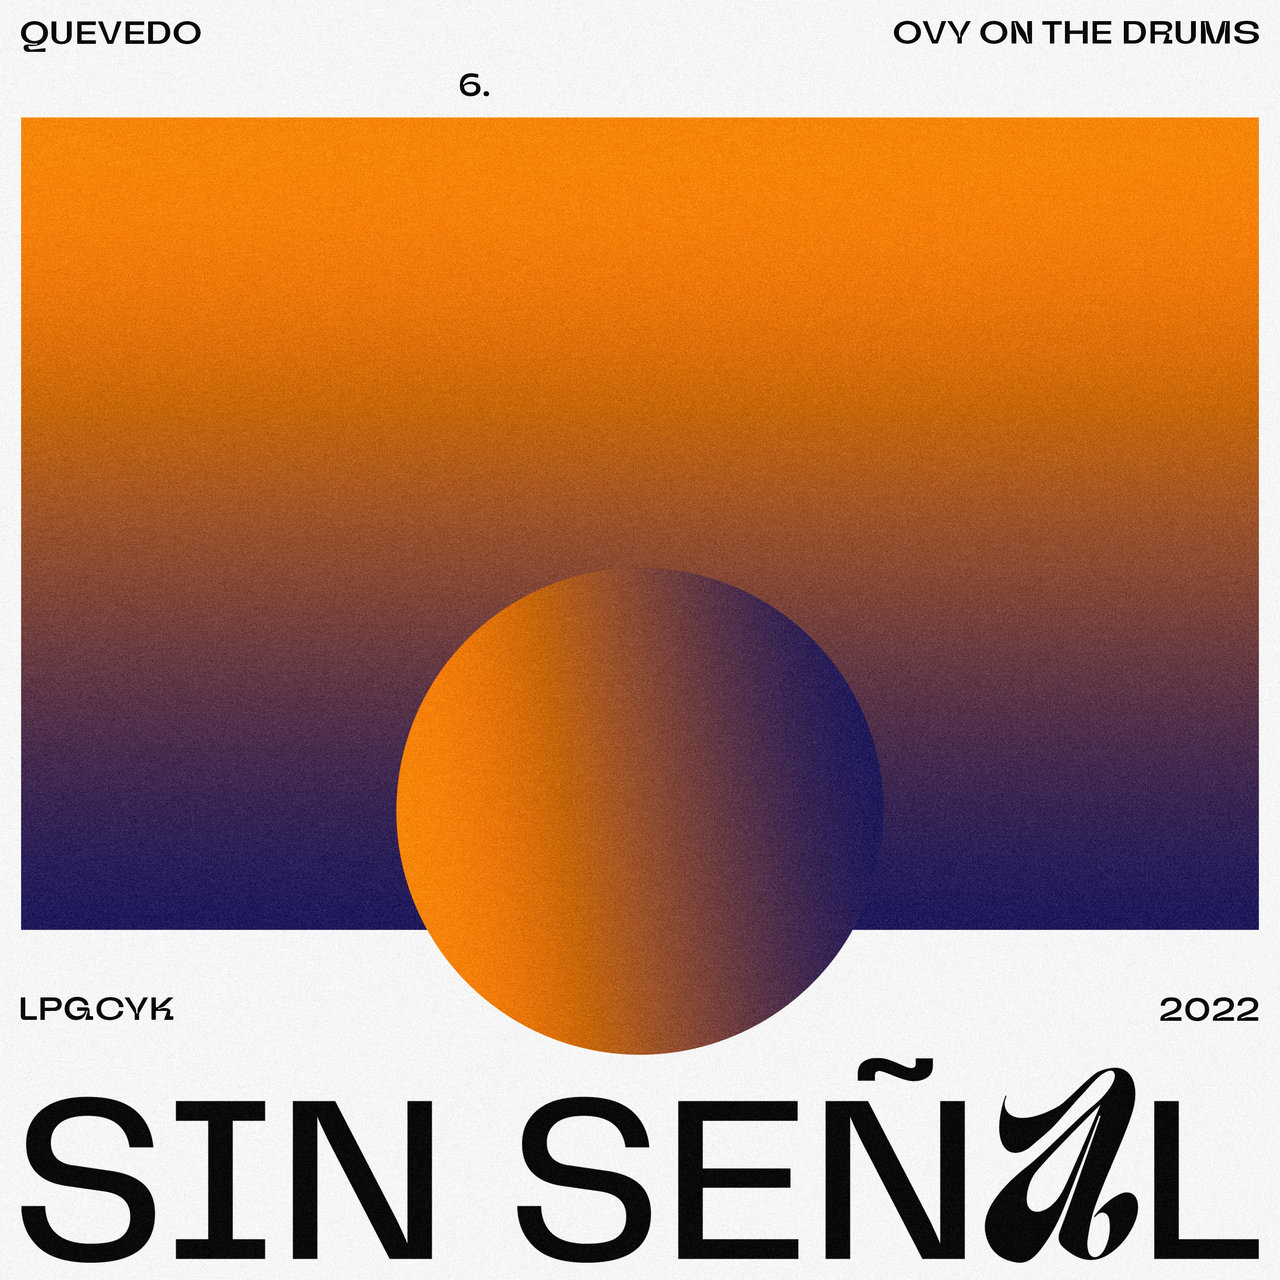 Quevedo & Ovy on the Drums — Sin Señal cover artwork